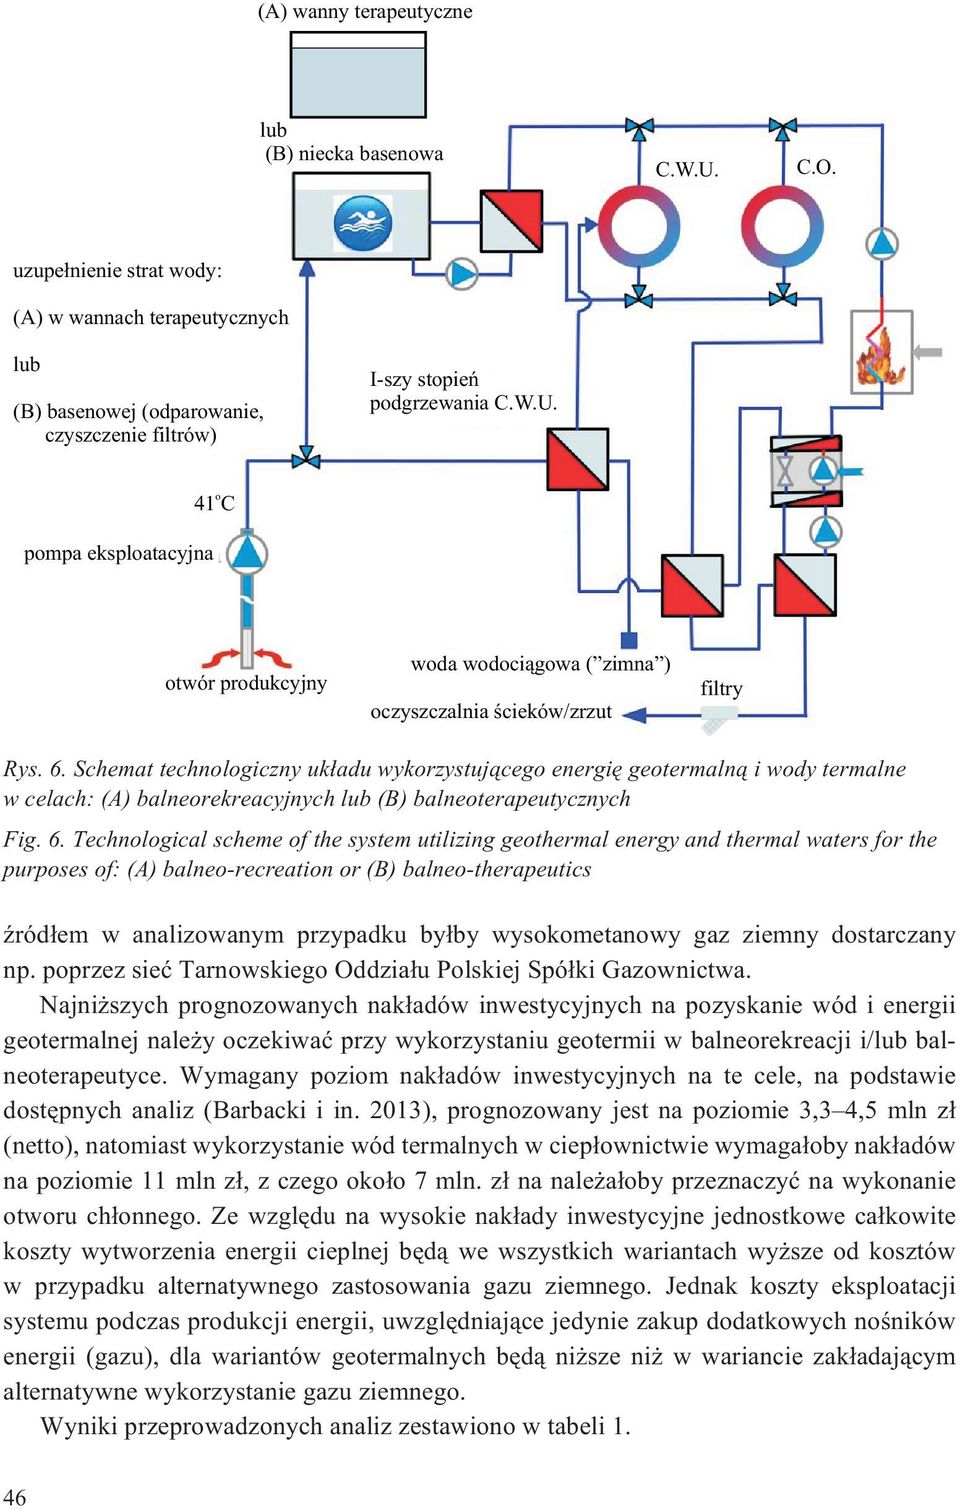 Technological scheme of the system utilizing geothermal energy and thermal waters for the purposes of: (A) balneo-recreation or (B) balneo-therapeutics Ÿród³em w analizowanym przypadku by³by